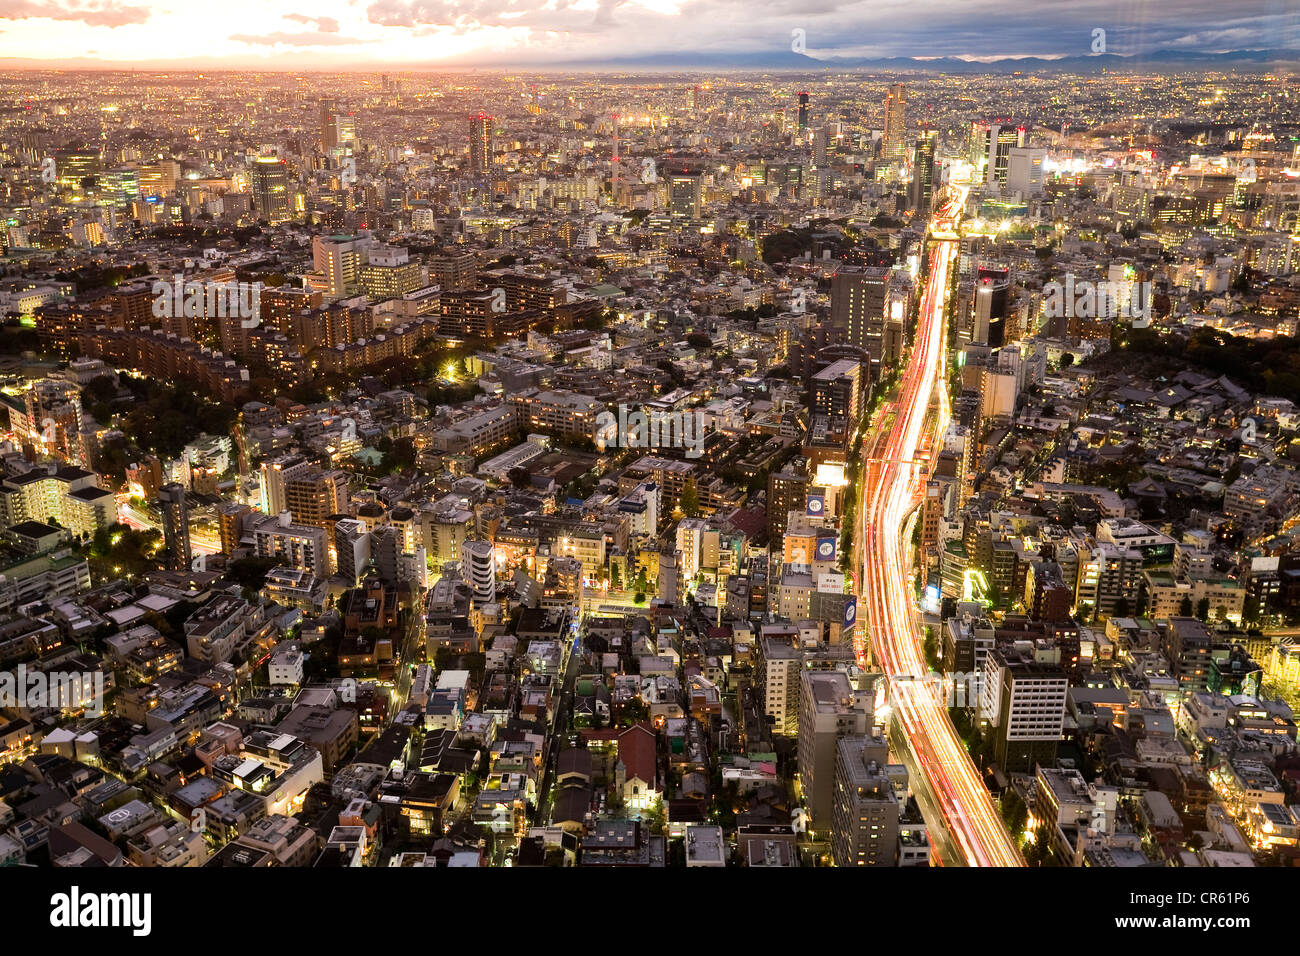 Japan, Honshu Island, Tokyo, Roppongi Hills, view from the Tokyo City View on the city center at dusk Stock Photo